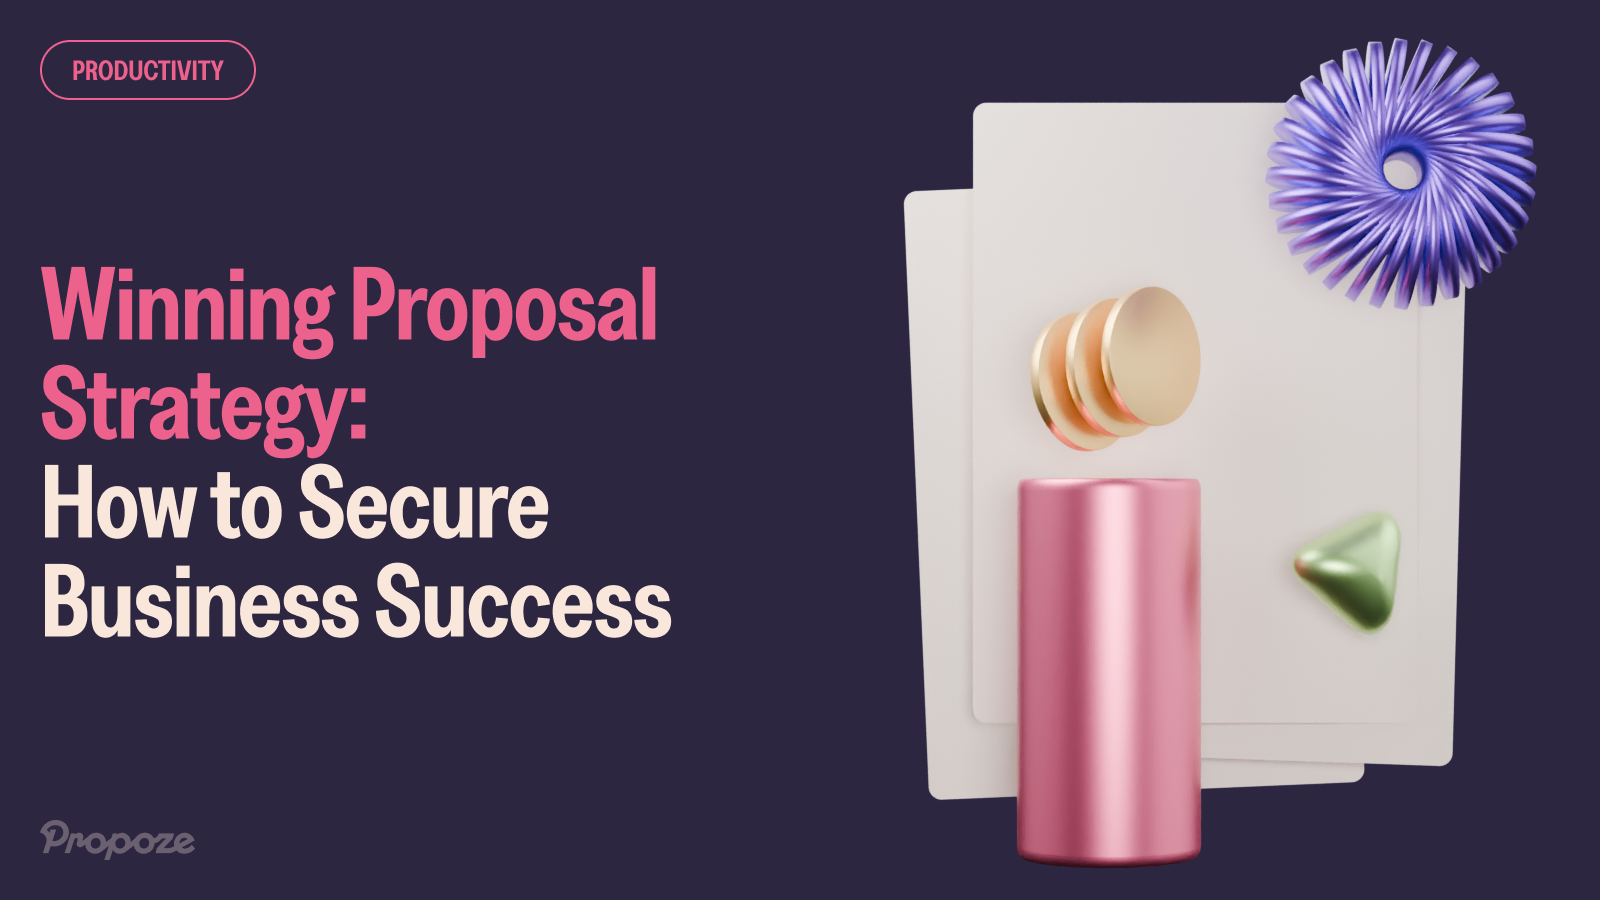 Winning Proposal Strategy: How to Secure Business Success